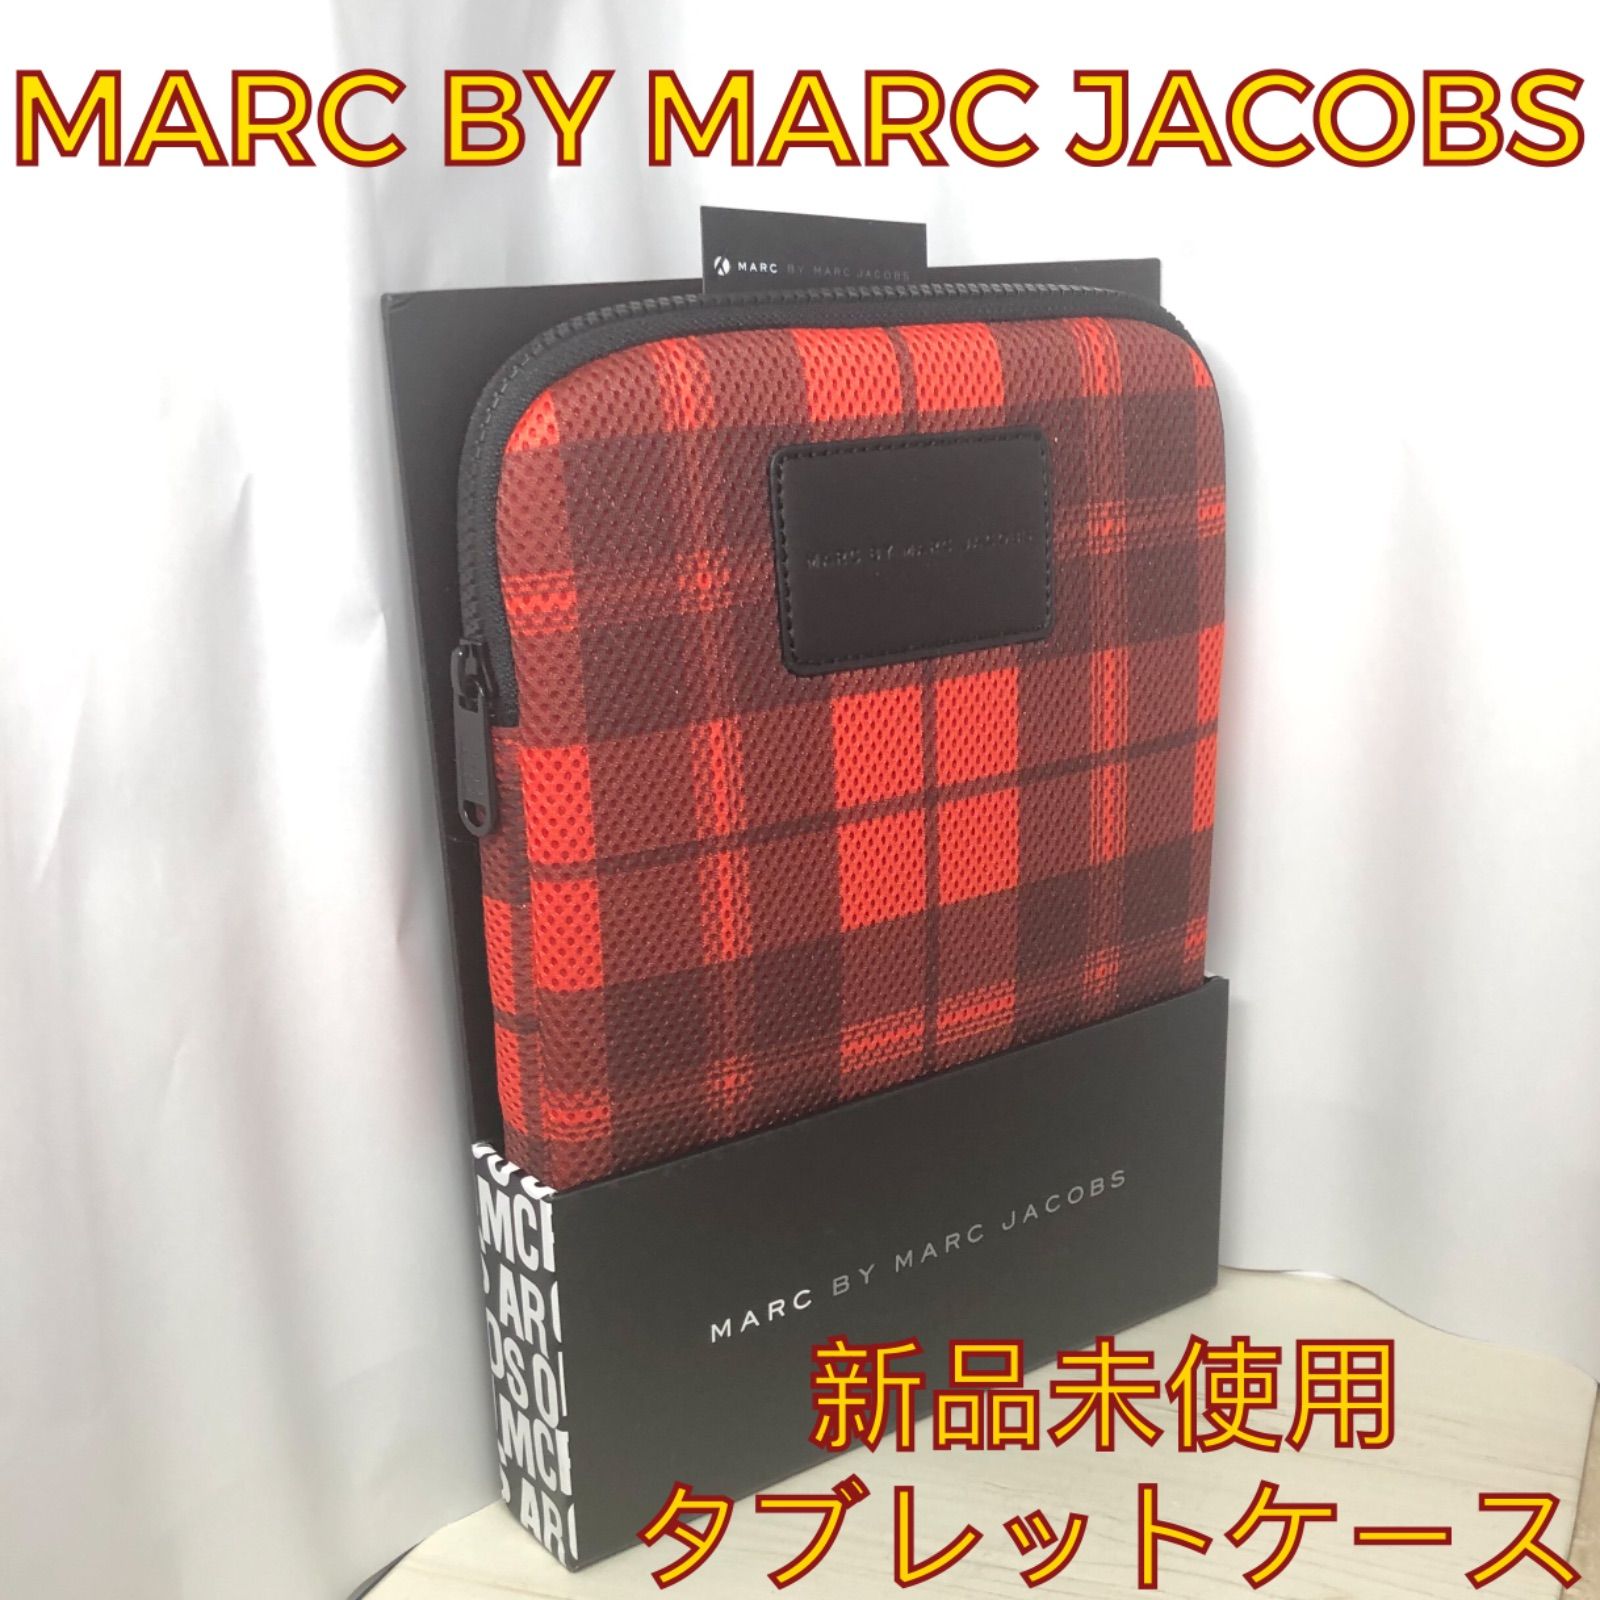 MARC JACOBS 新品未使用　タグ付きMarcJacobs